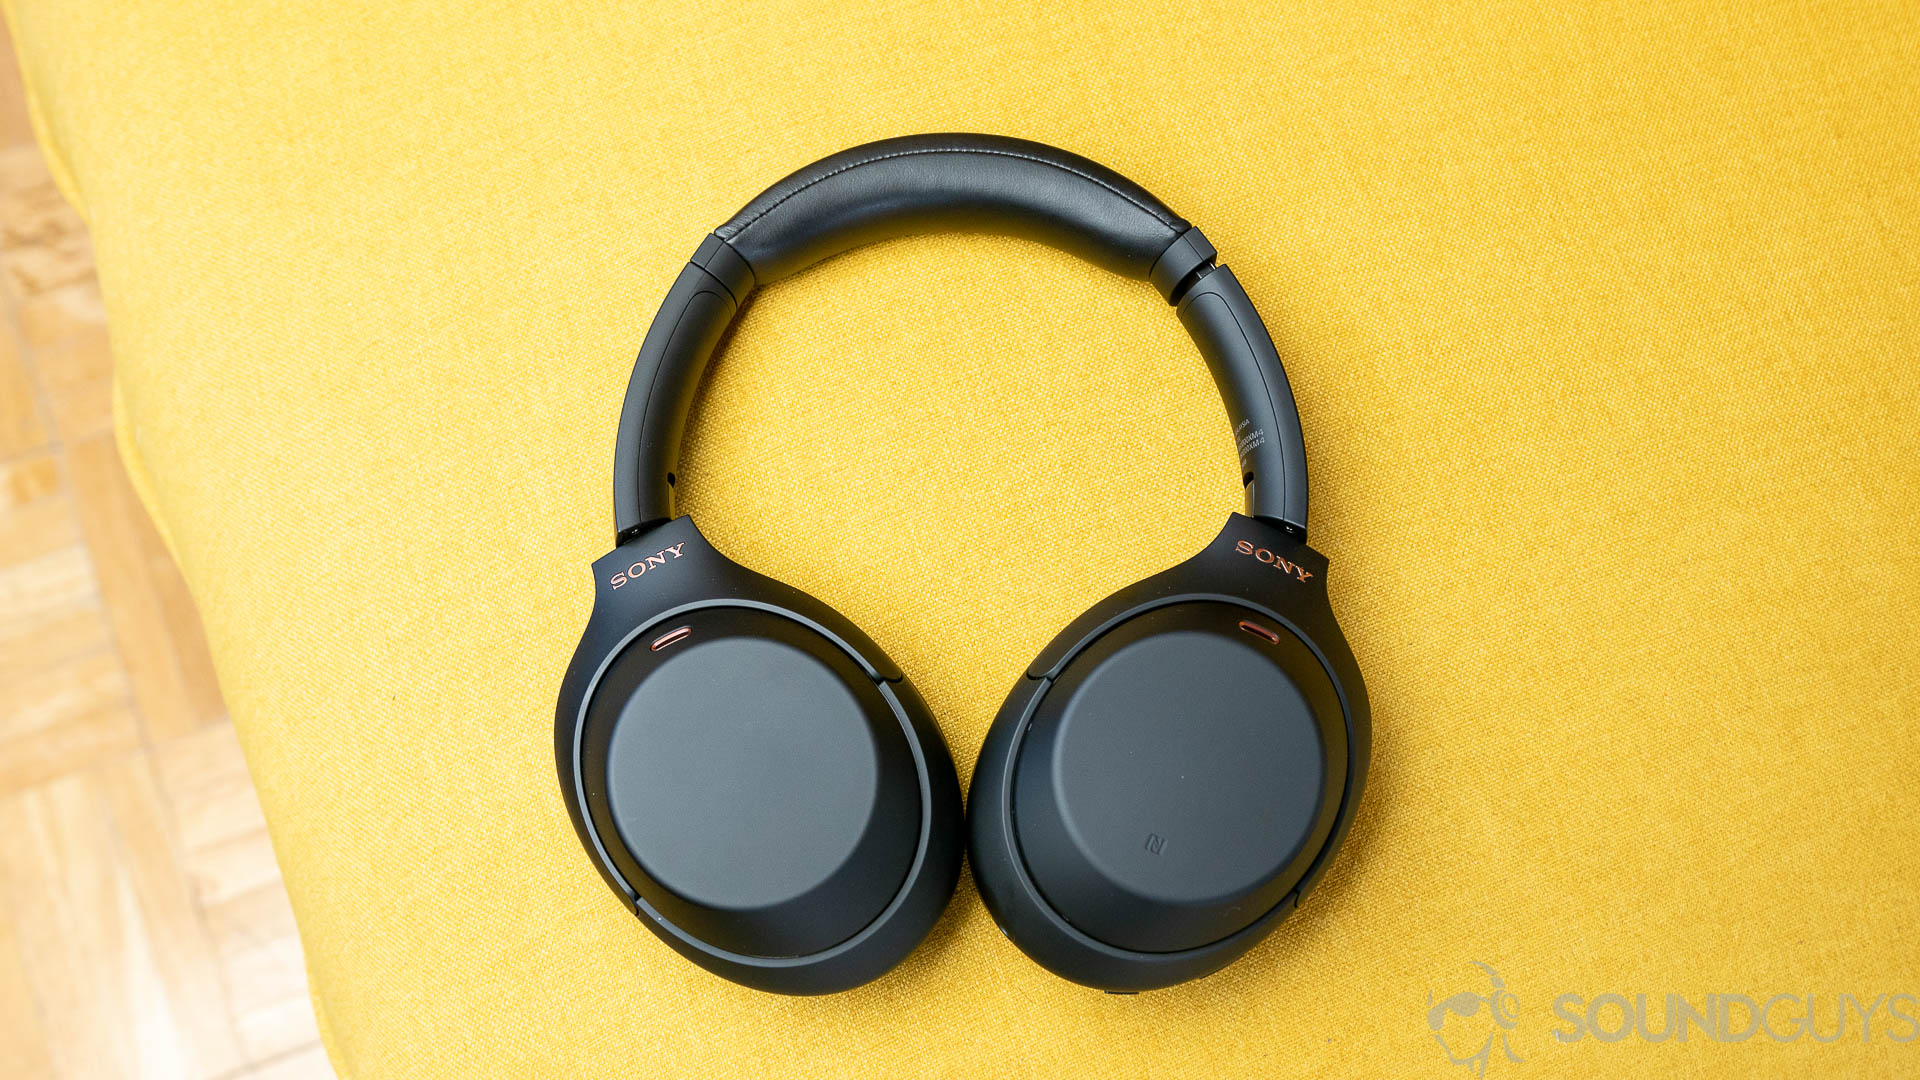 The Sony WH-1000XM4 noise cancelling headphones against full yellow backdrop.